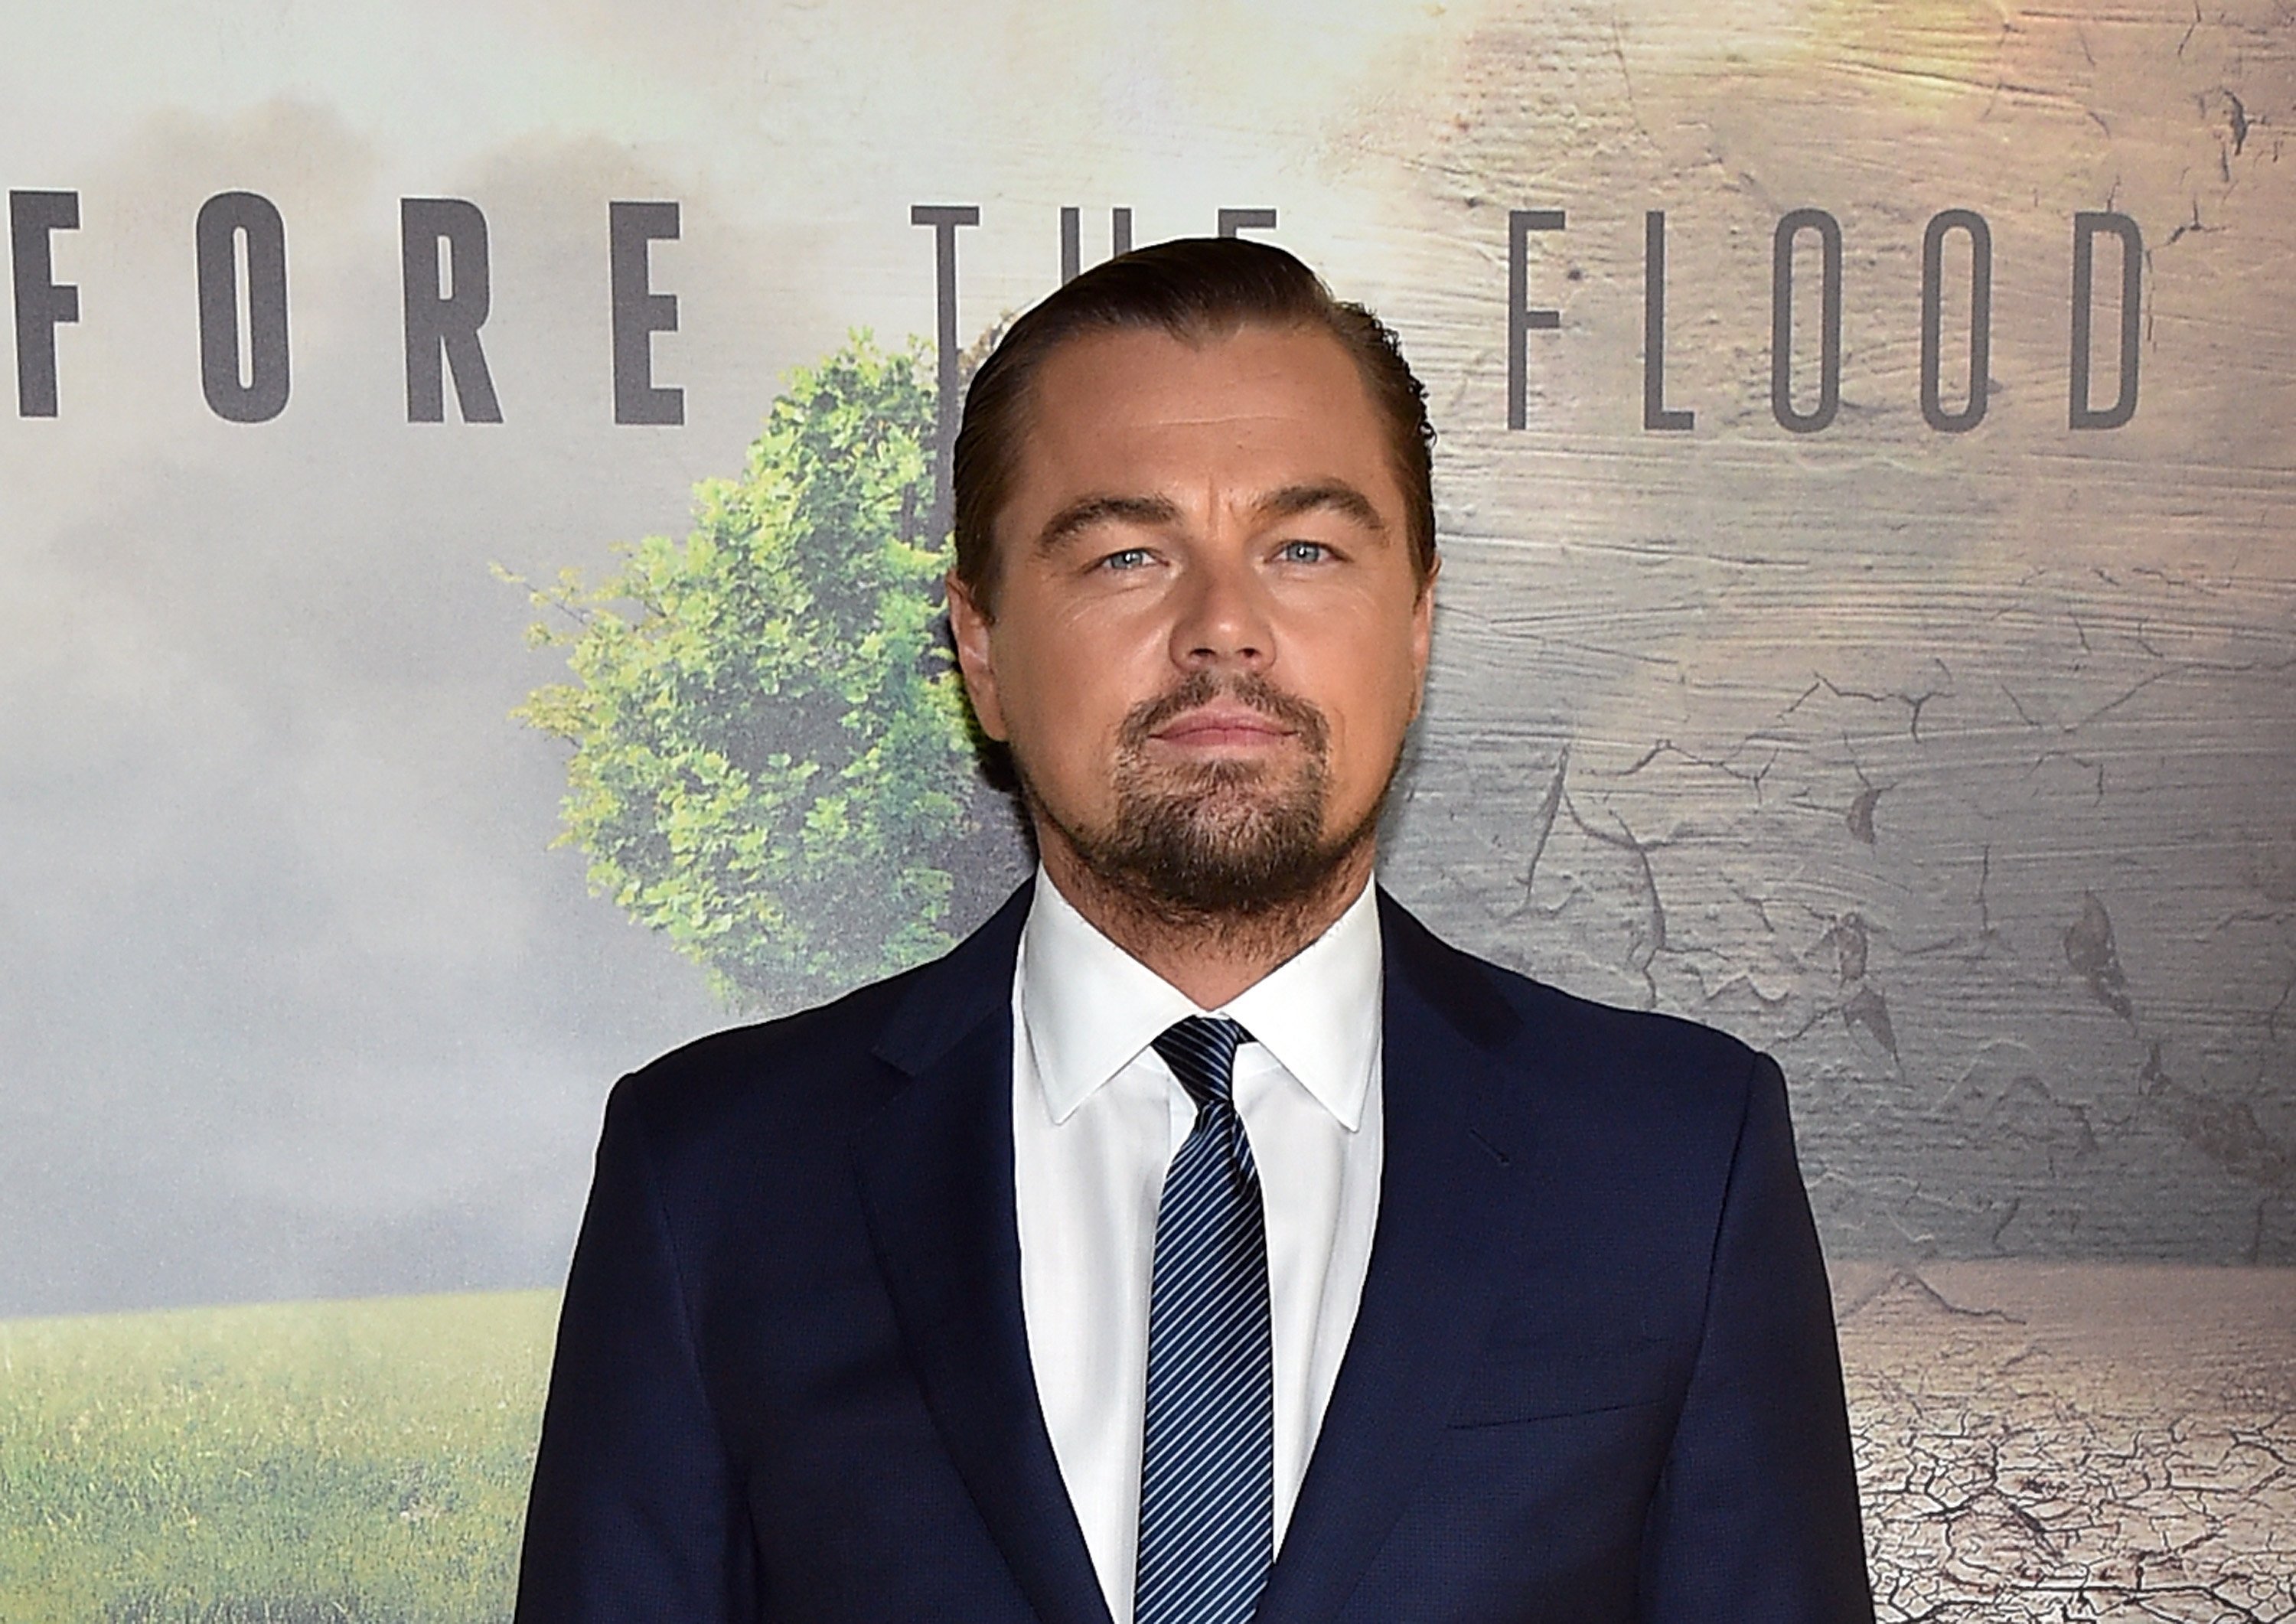 Leonardo DiCaprio at the premiere of the flim "Before the Flood" in 2016 | Photo: Getty Images